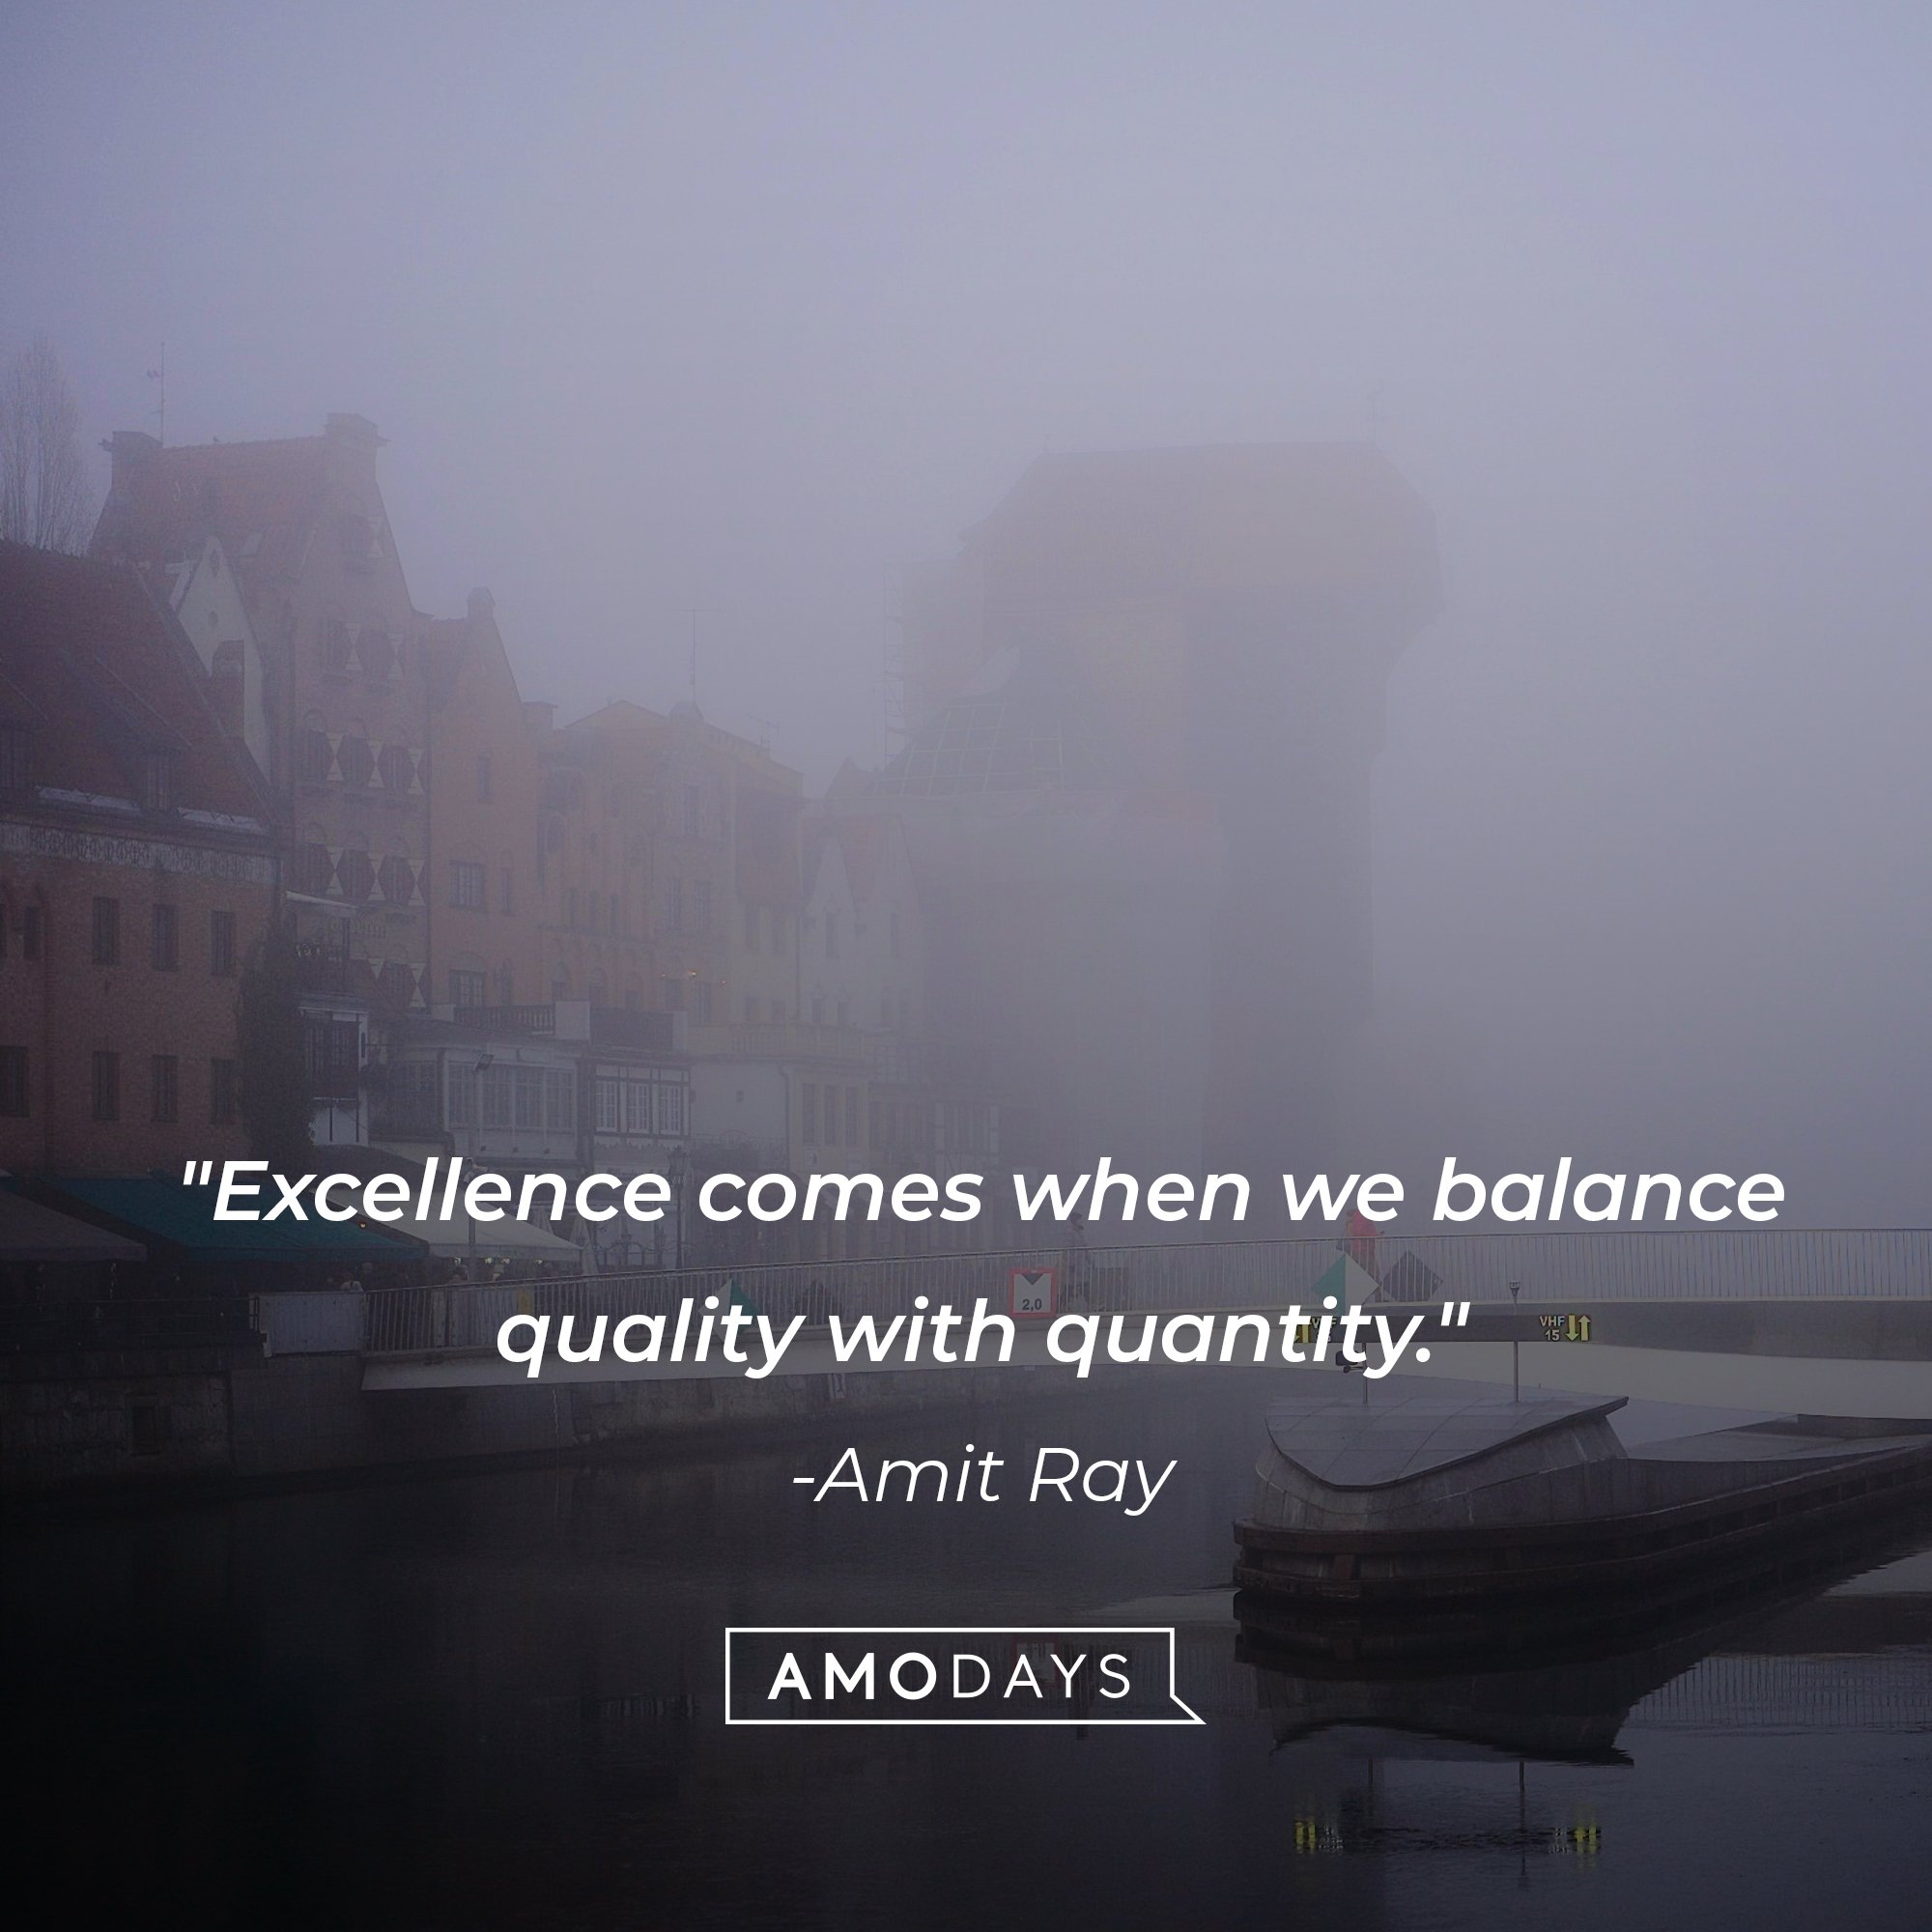 Amit Ray’s quote: "Excellence comes when we balance quality with quantity." | Image: AmoDays 